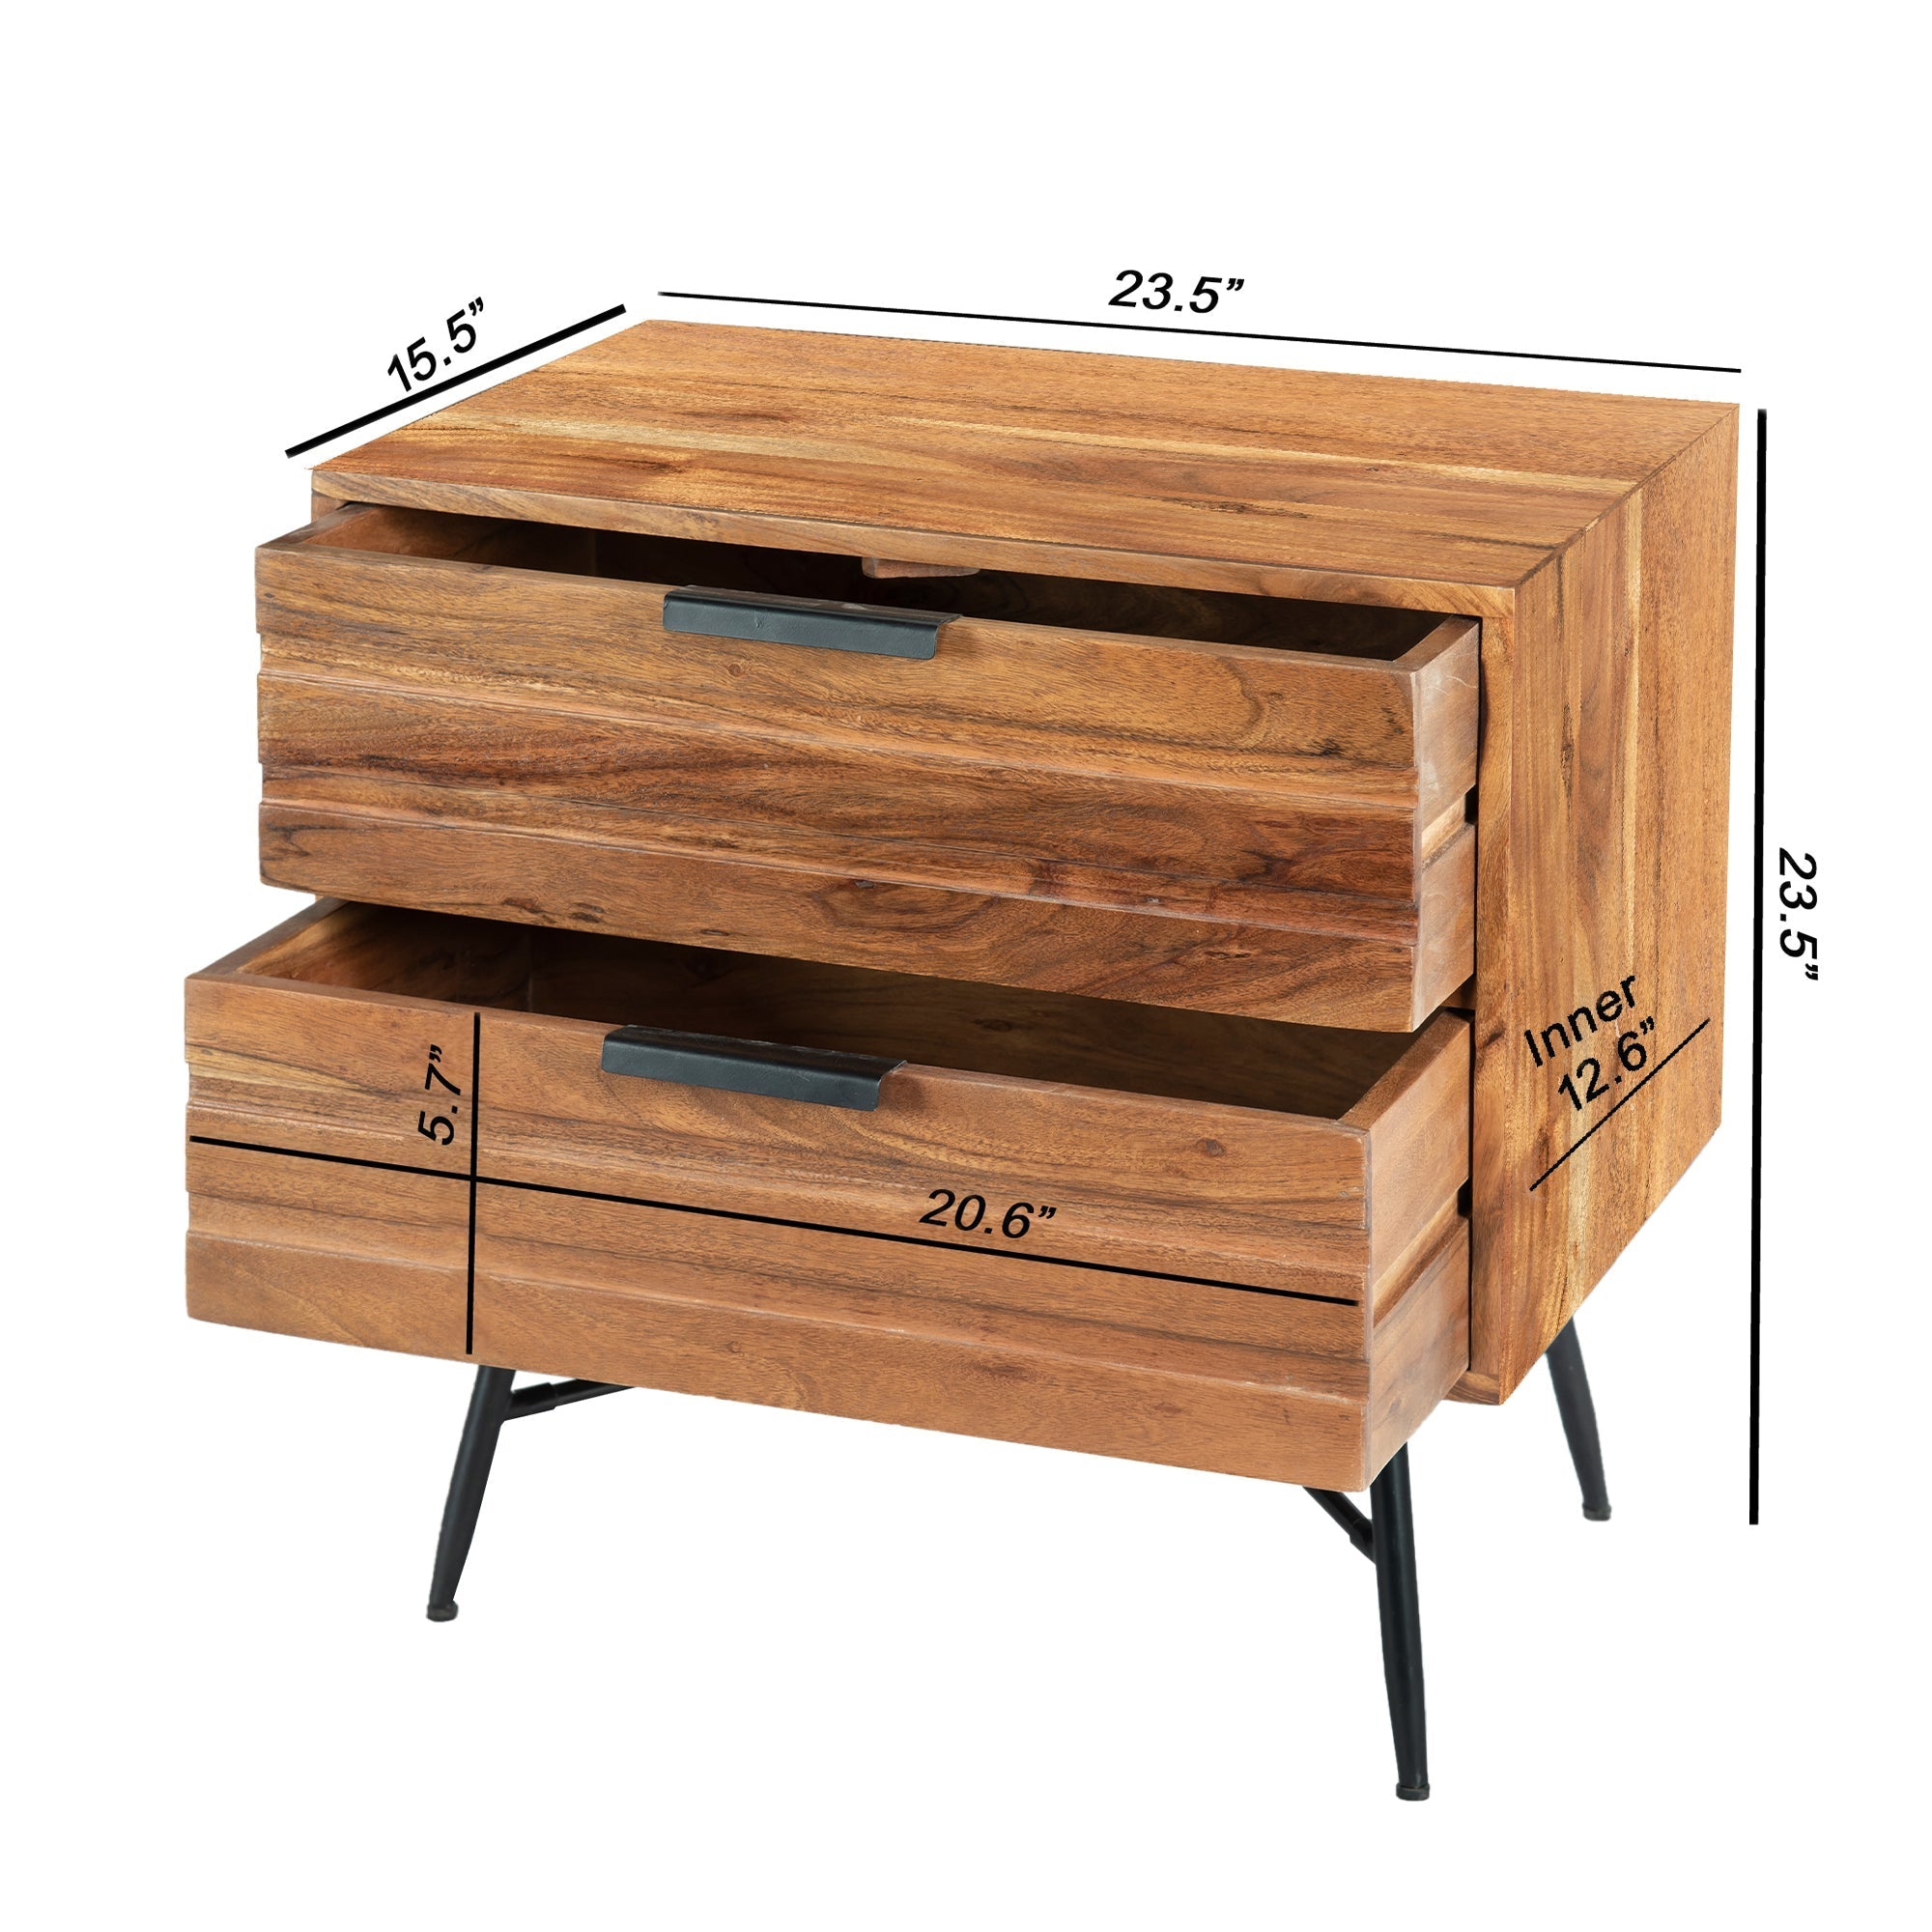 Benzara UPT-195128 2 Drawer Wooden Nightstand with Metal Angled Legs